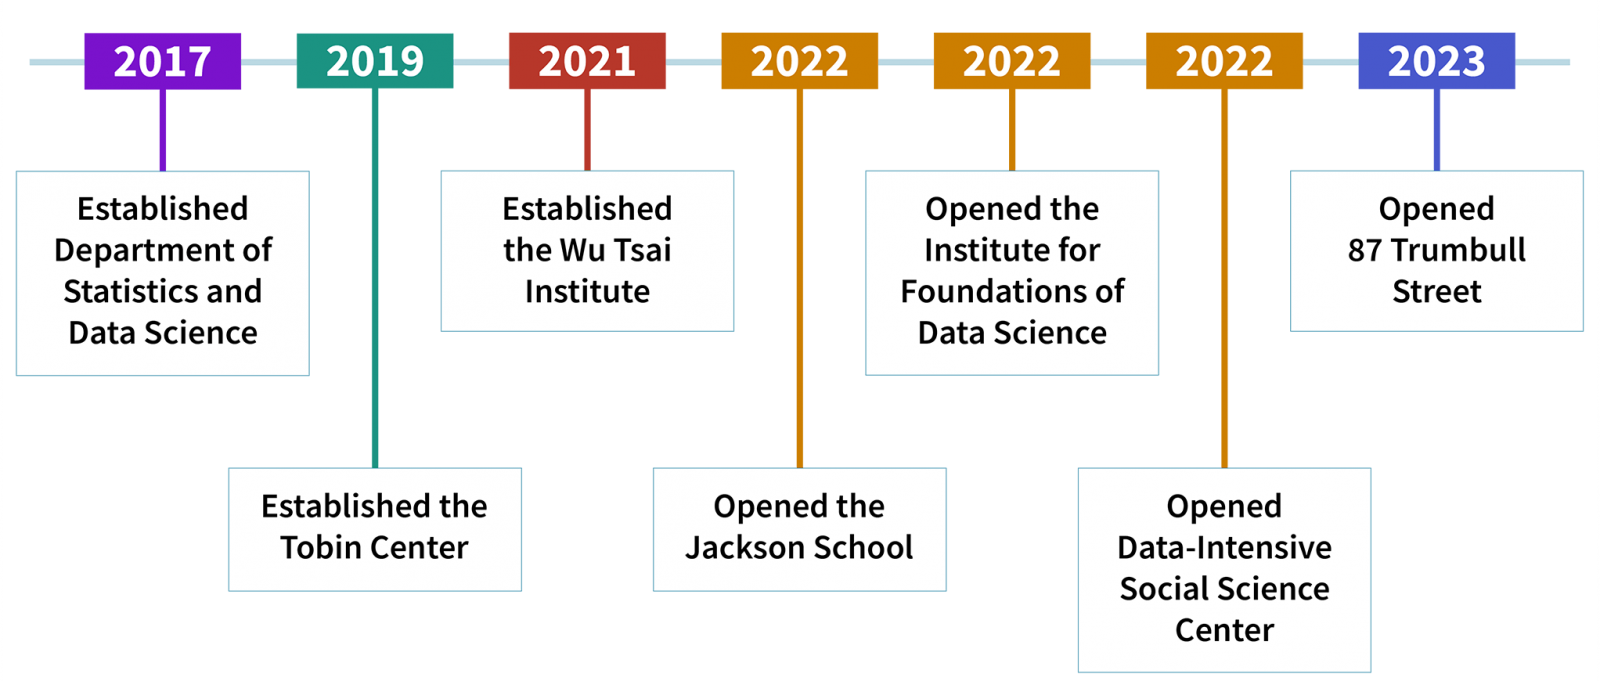 A timeline from 2017 to 2023 of selected milestones in data-drive social sciences Yale.